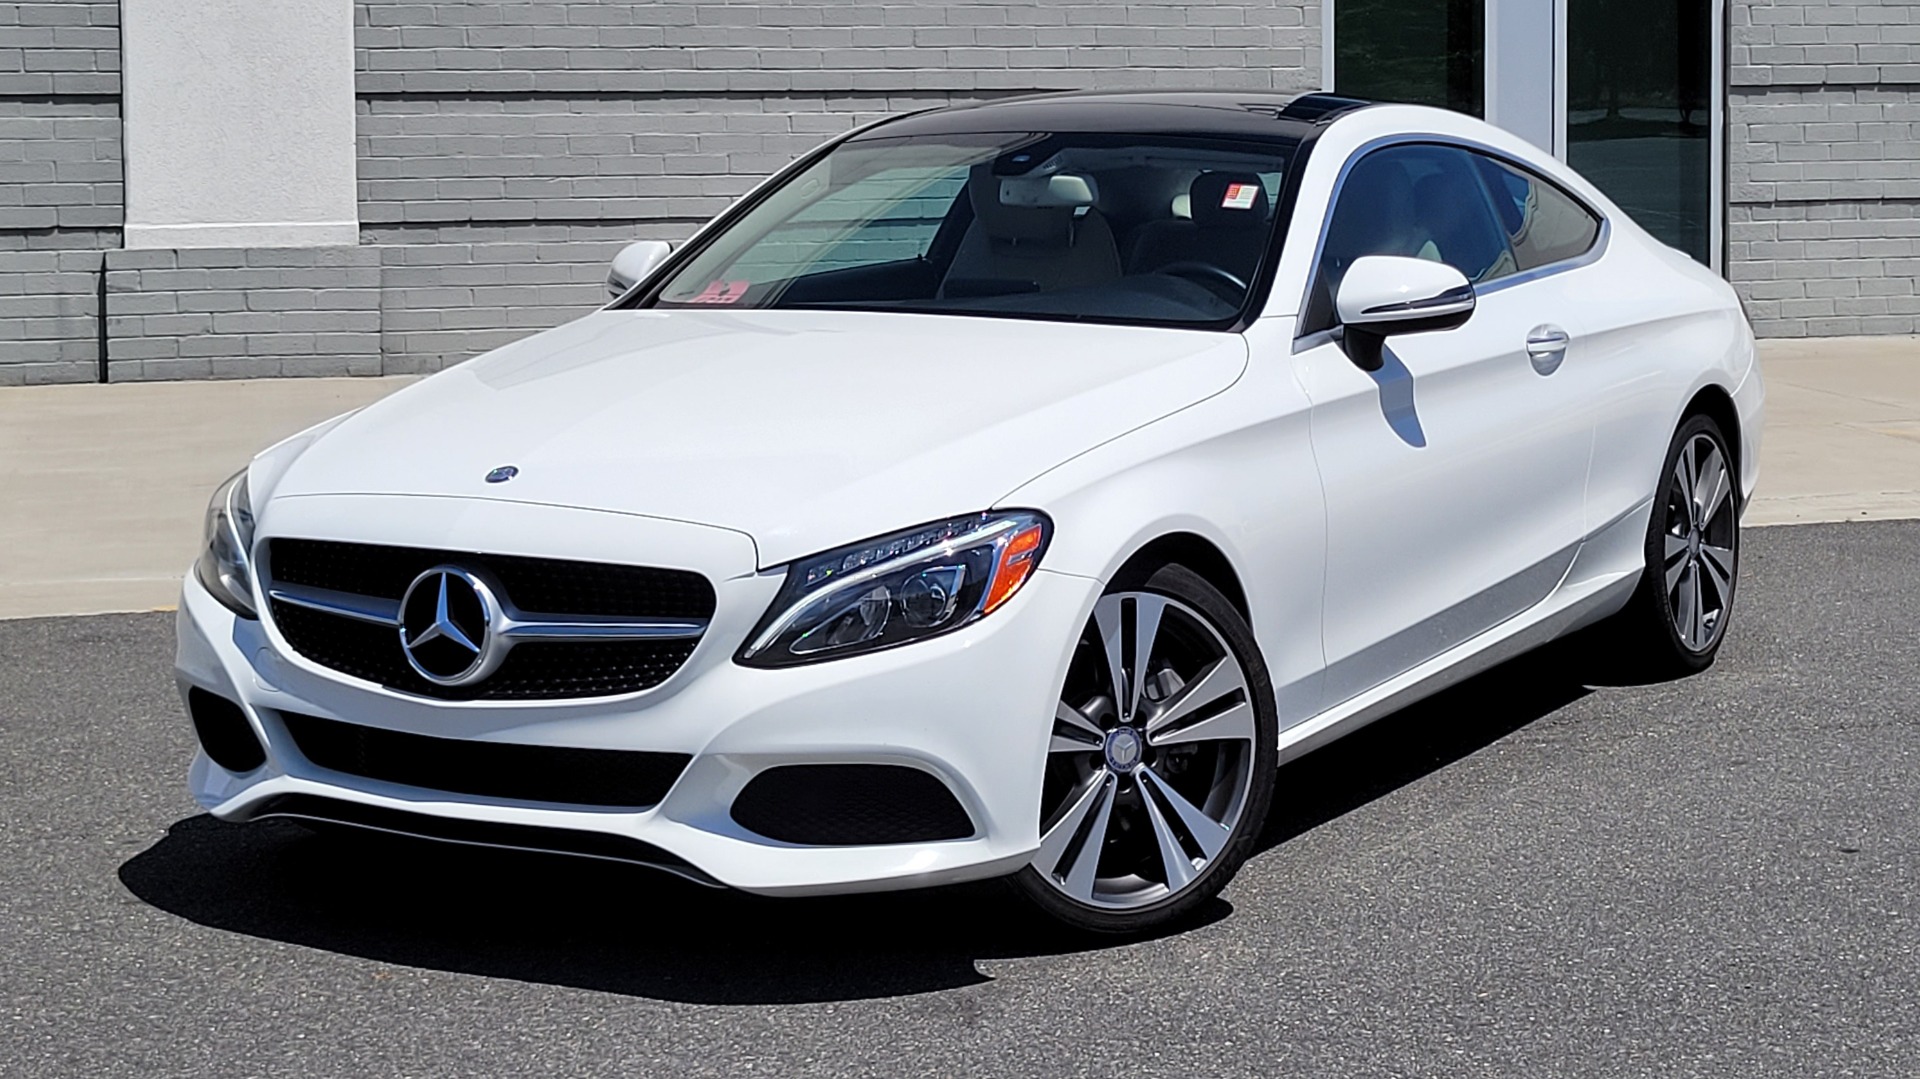 Used 2017 Mercedes-Benz C-CLASS C 300 PREMIUM COUPE / BLIND SPOT ASST / BURMESTER / CAMERA for sale $31,995 at Formula Imports in Charlotte NC 28227 1